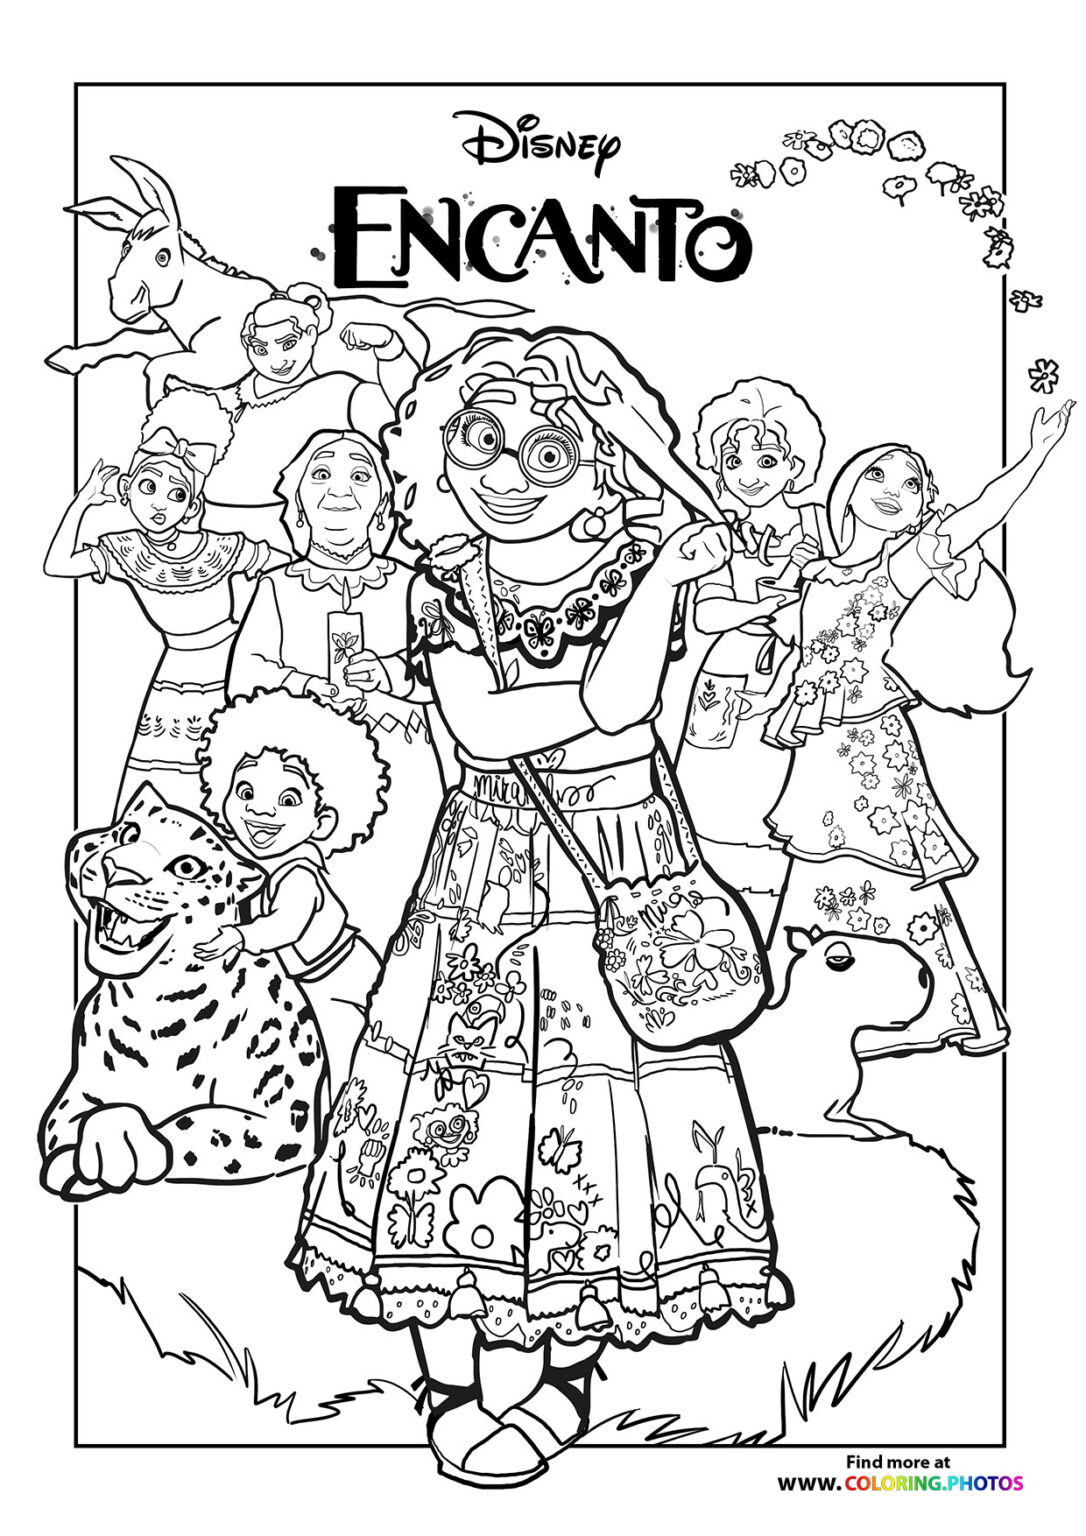 Antonio - Coloring Pages for kids